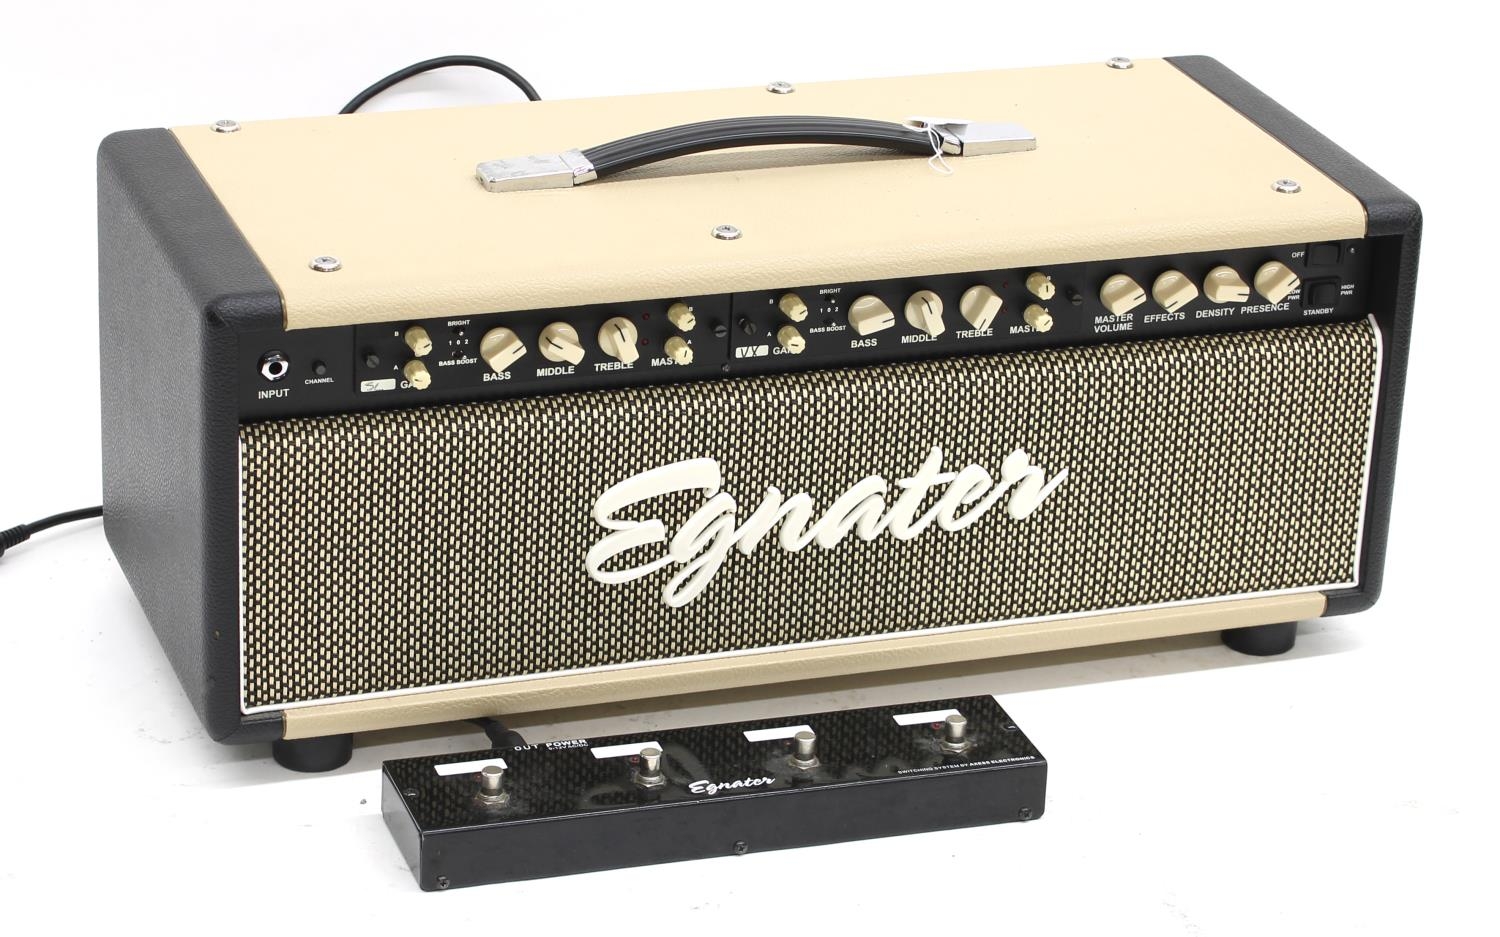 Egnater Mod 50 guitar amplifier, made in USA, fitted with 'SL (Super Lead)' and 'VX' modules, with